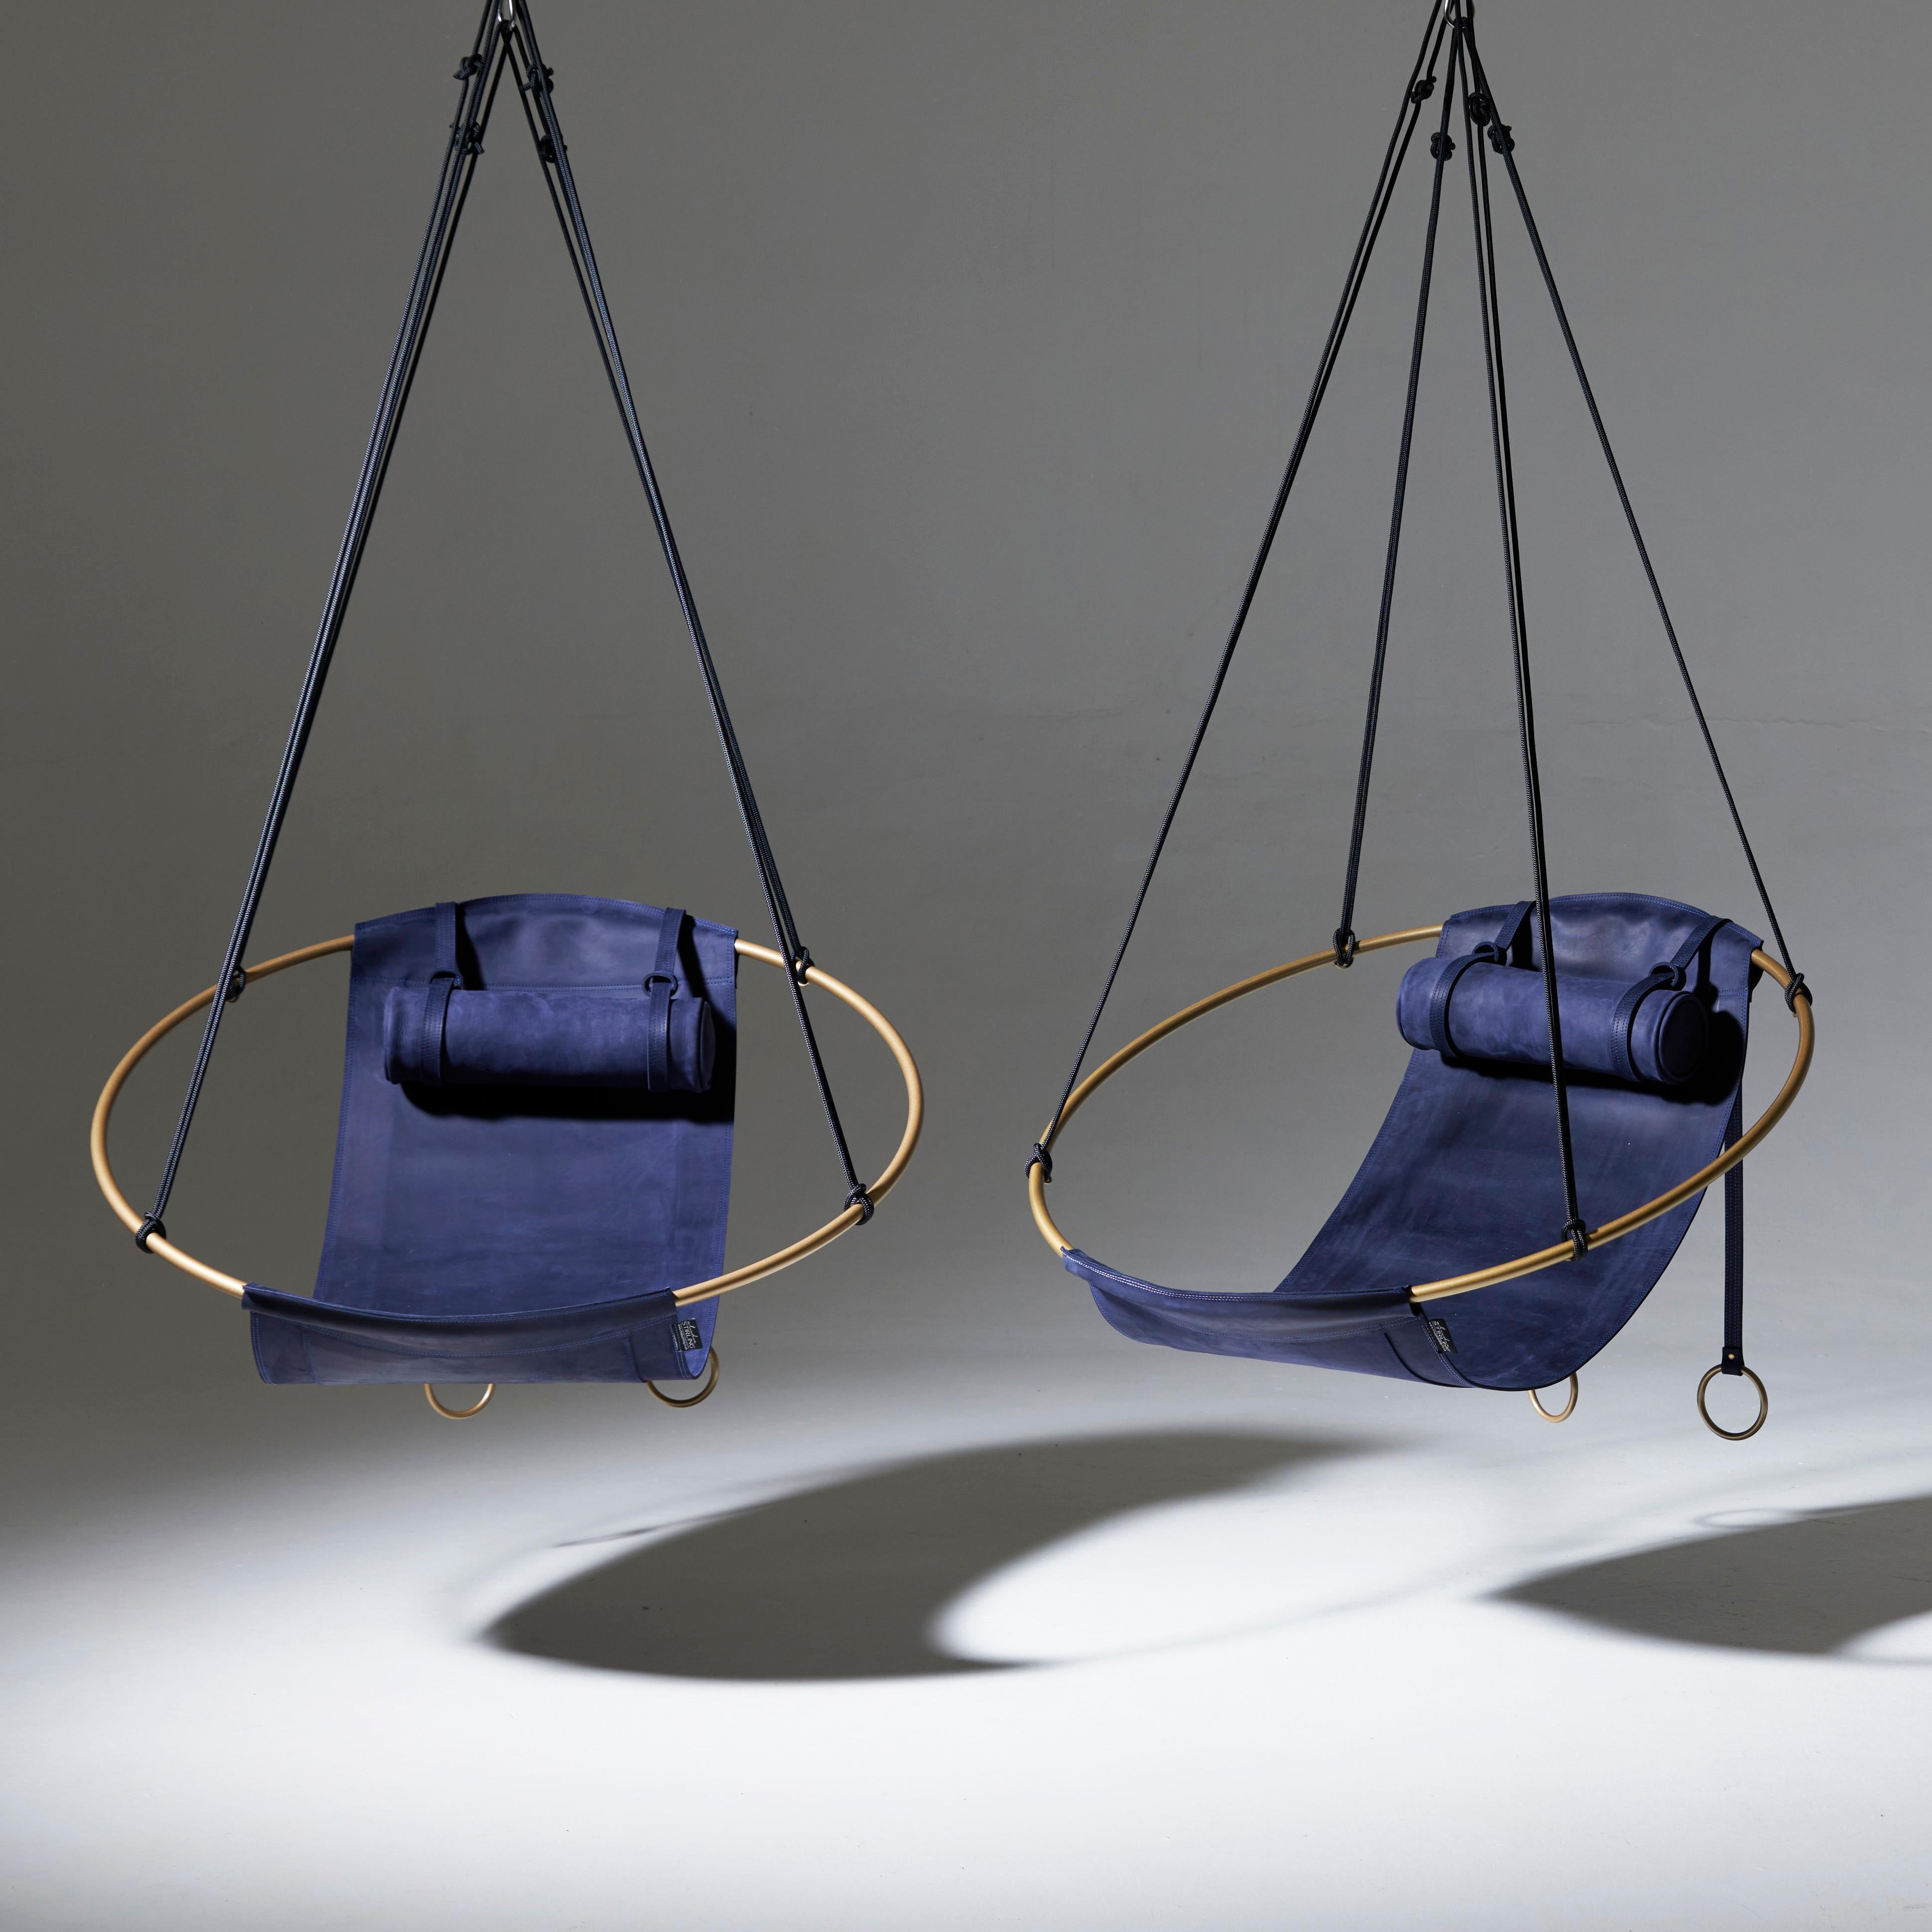 Minimal Modern One of a Kind Blue and Gold Sling Hanging Swing Chair 5